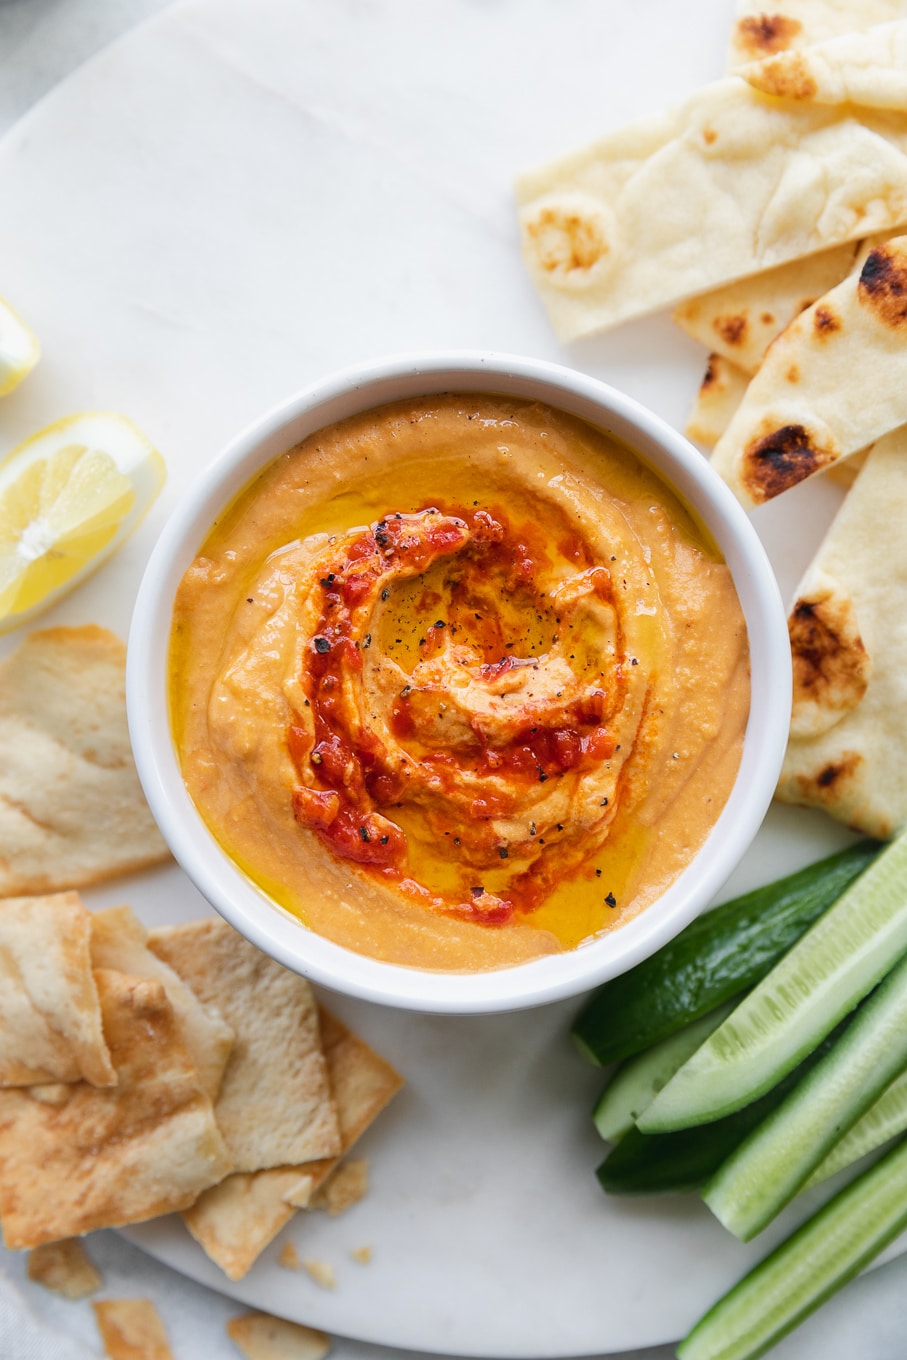 Overhead shot of a bowl of harissa hummus surrounded by naan wedges, cucumber spears, and chips